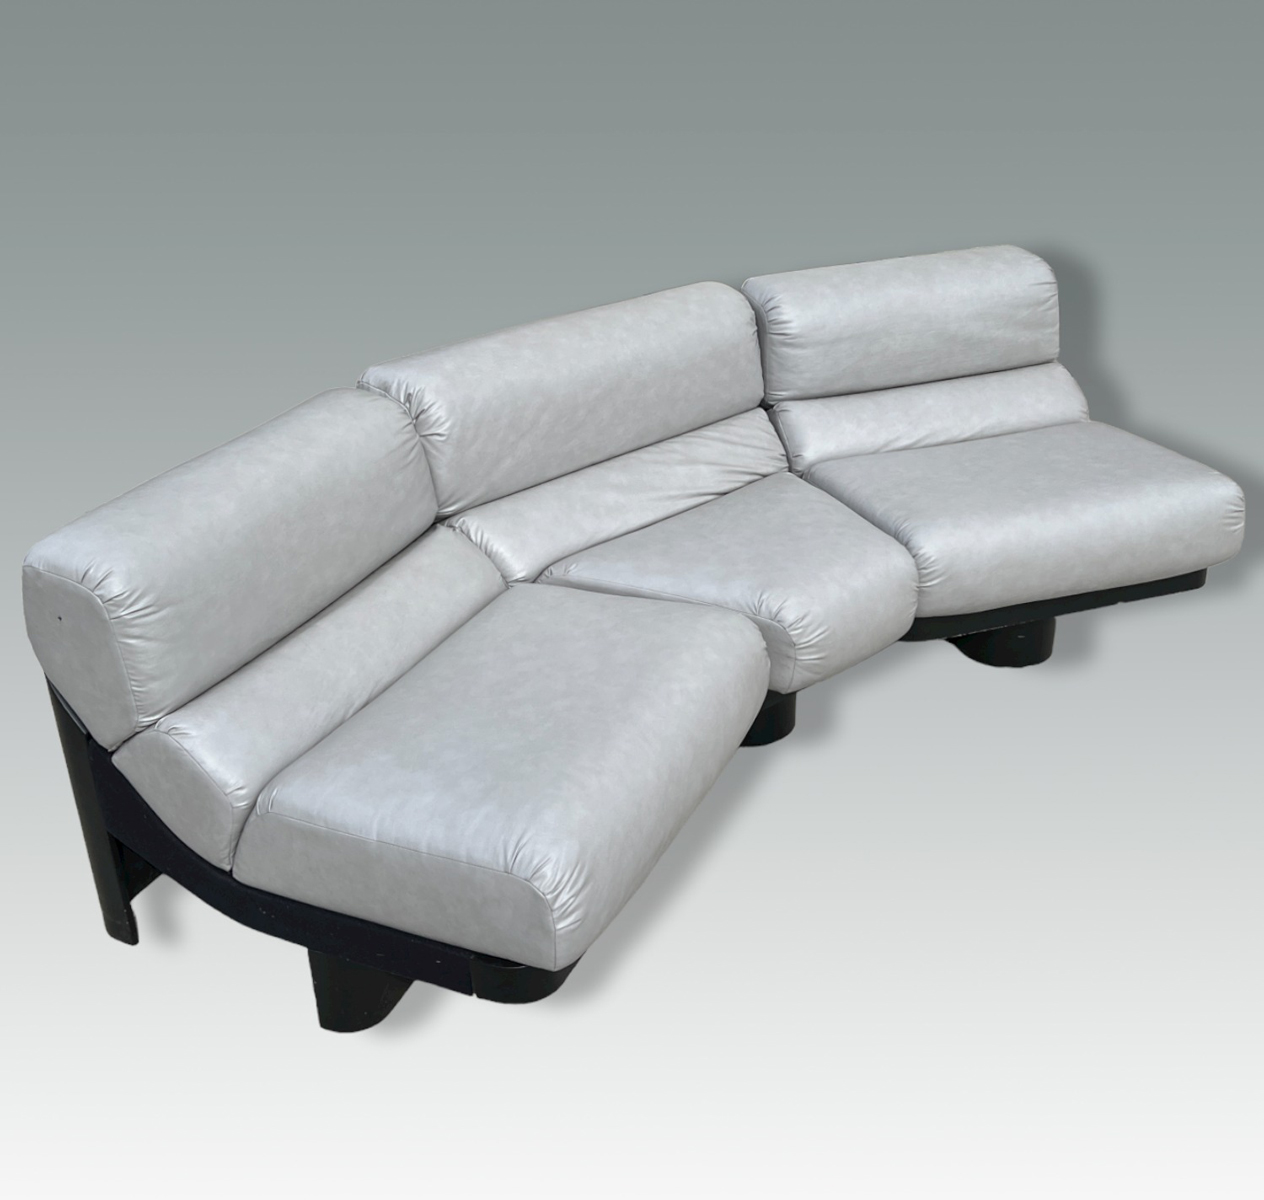 3 PC MODERN SECTIONAL FAUX LEATHER 36a1d4